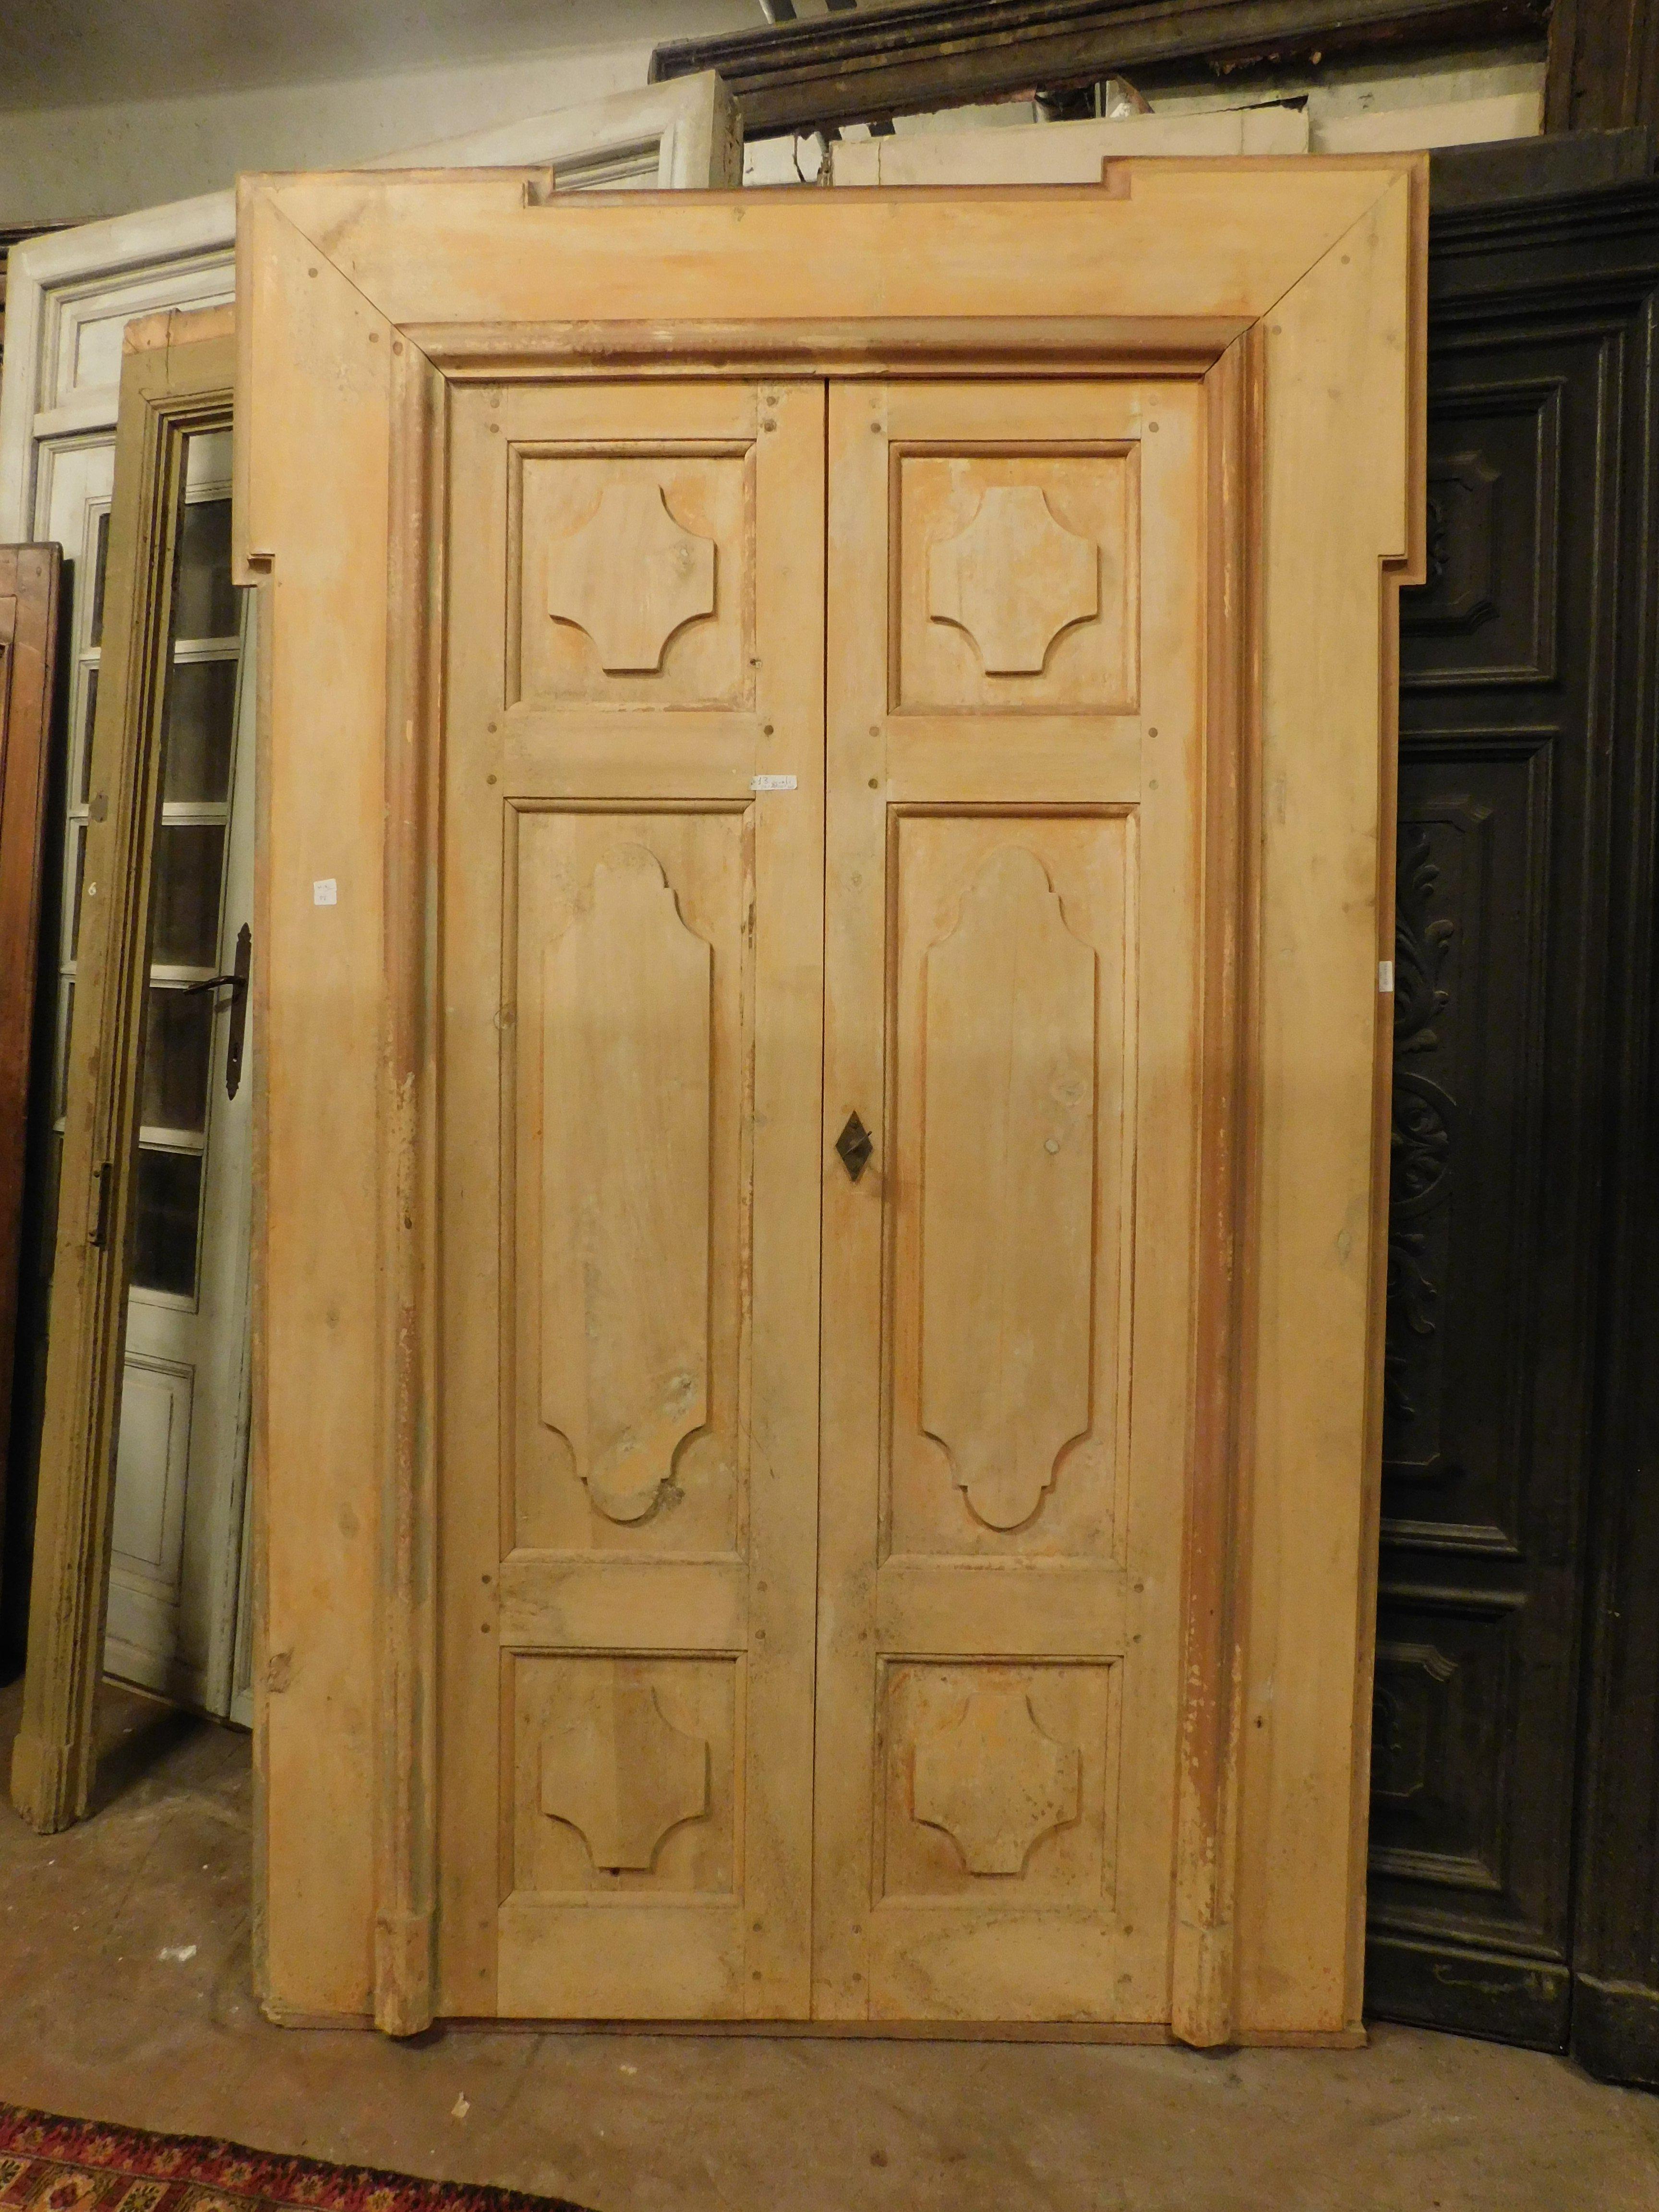 unique and rare, series of 8 antique double doors, lacquered yellow poplar background with original ear frame, incredible find as it is difficult to find such large series of antique doors, built in Italy towards the end of the 19th century. We sell